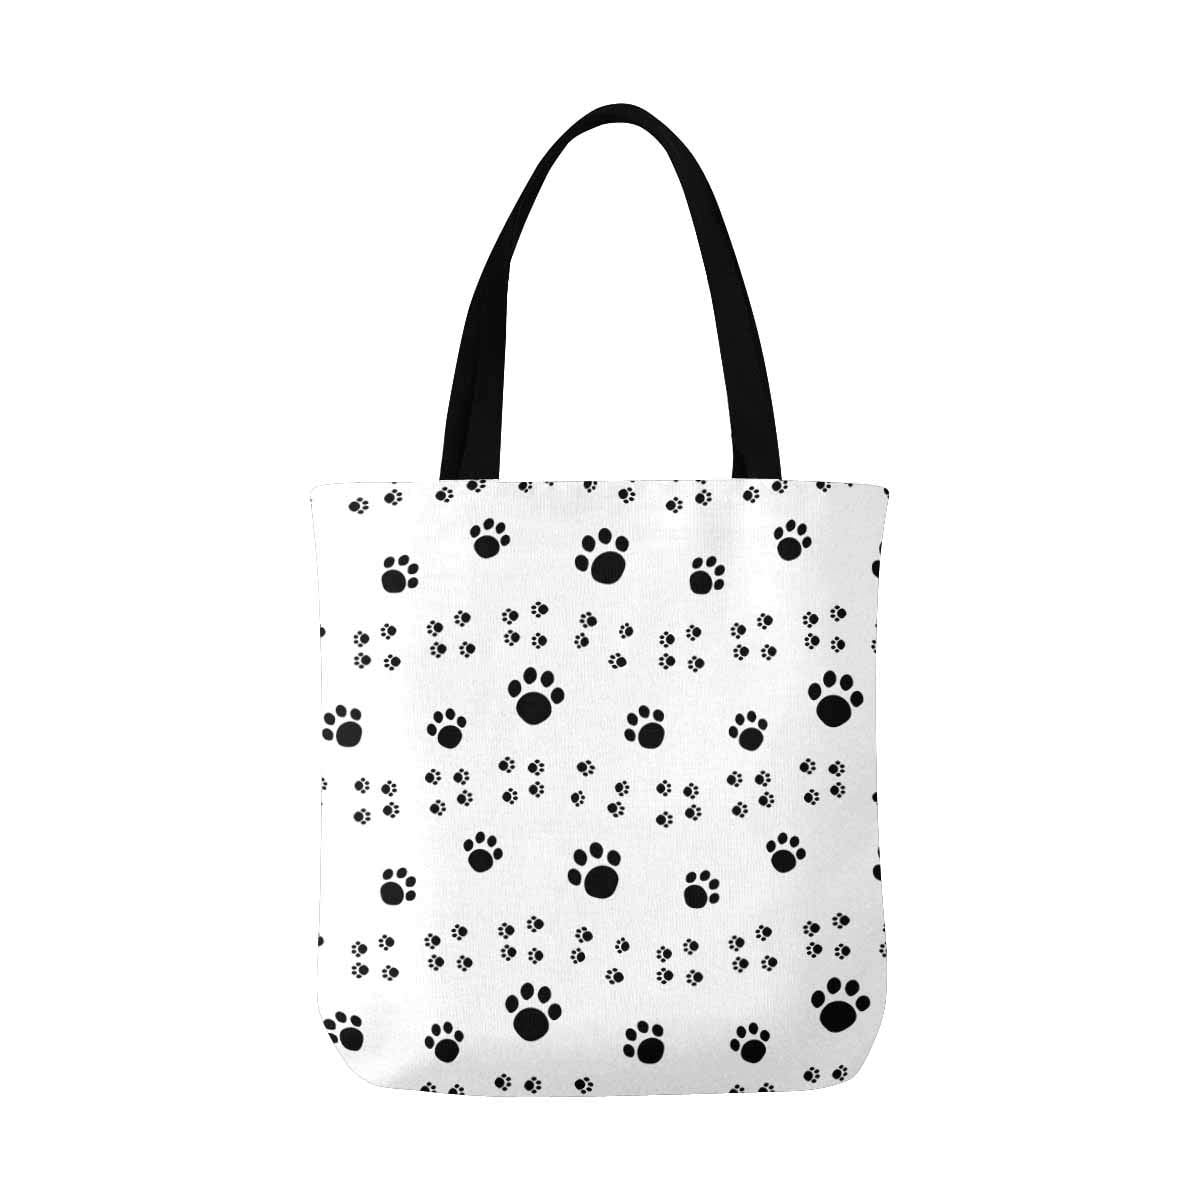 HATIART Paw Print Pattern Reusable Grocery Bags Shopping Bag Canvas ...